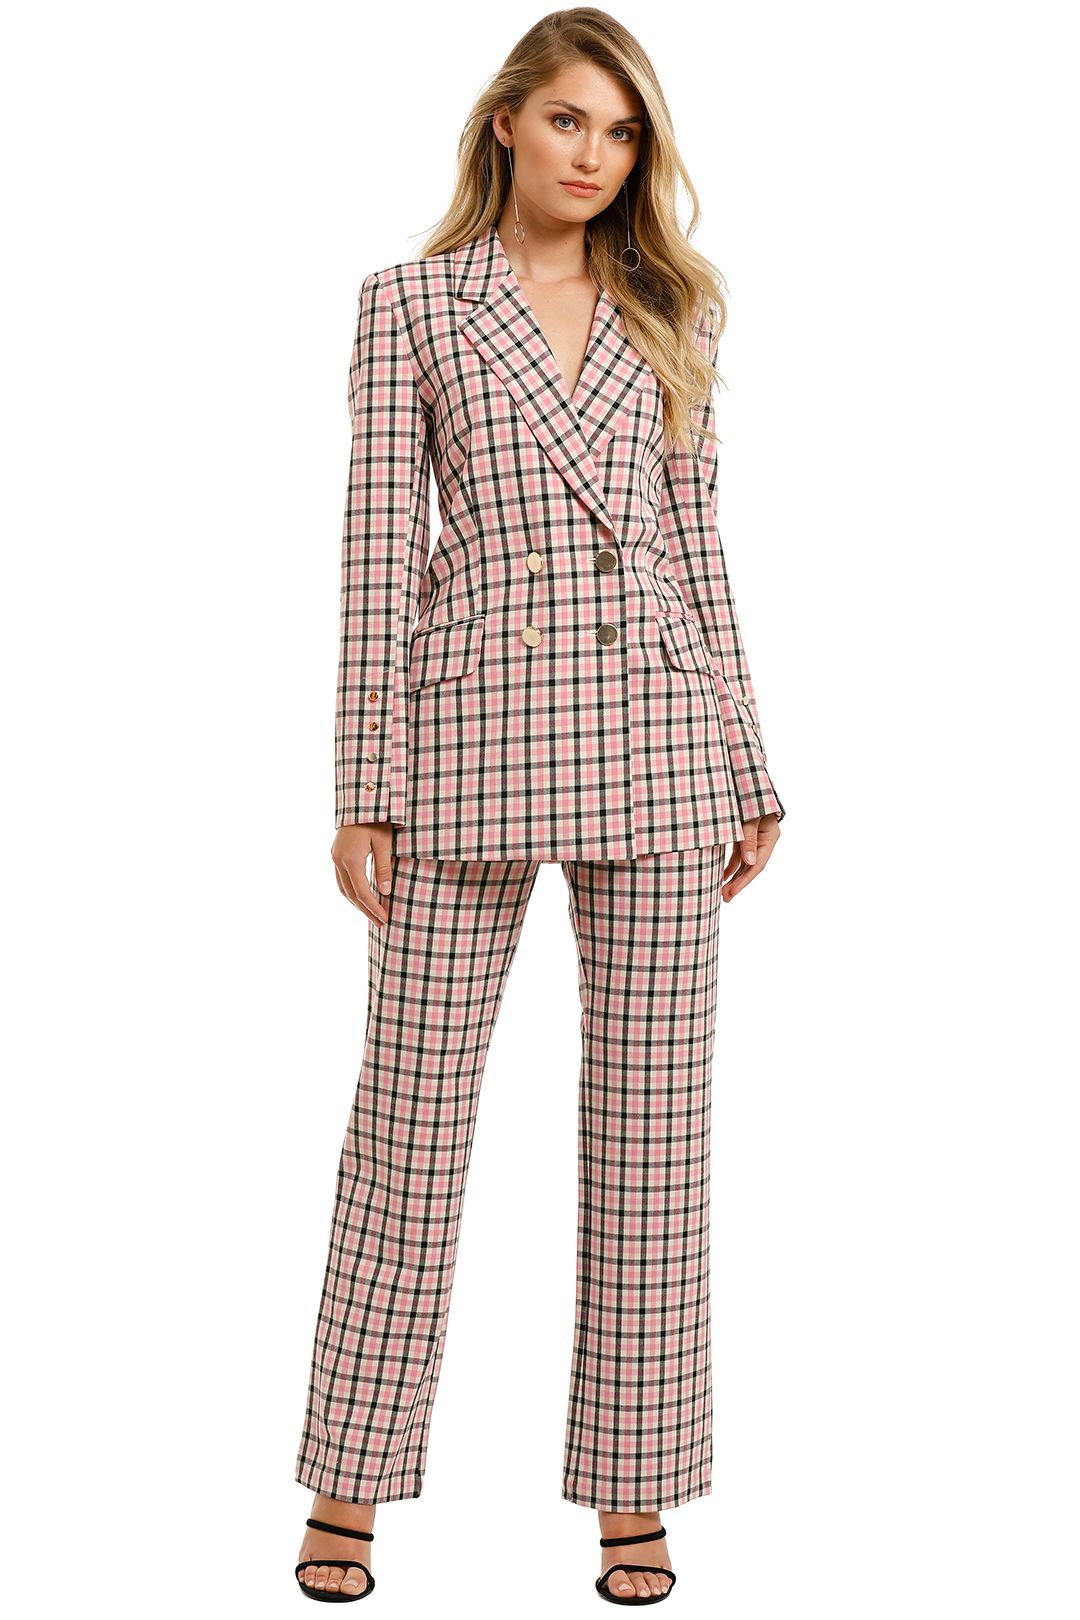 Pasduchas-Checker-Blazer-and-Pant-Suit-Pink-Check-Front